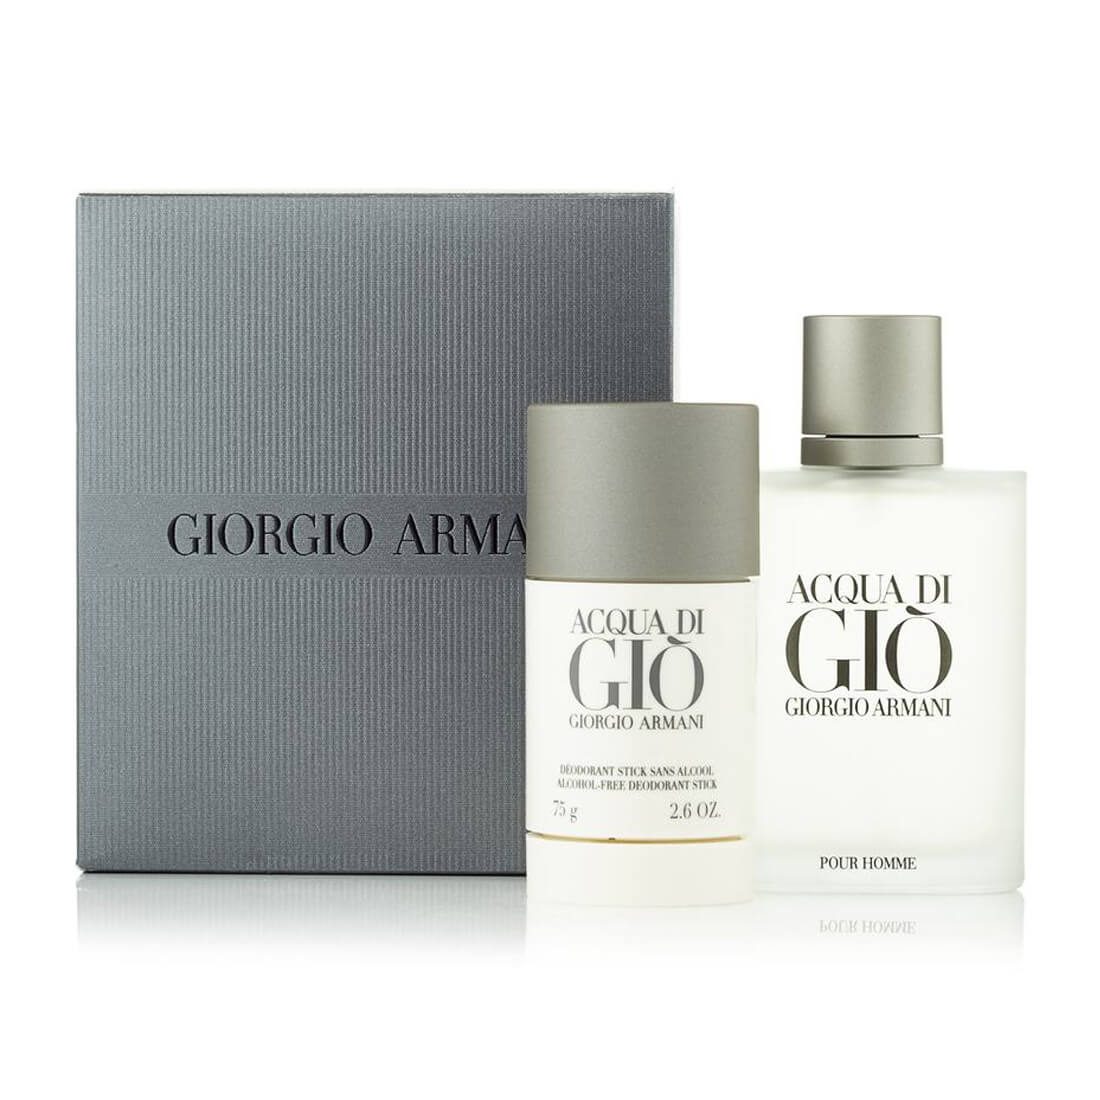 armani aftershave gift sets